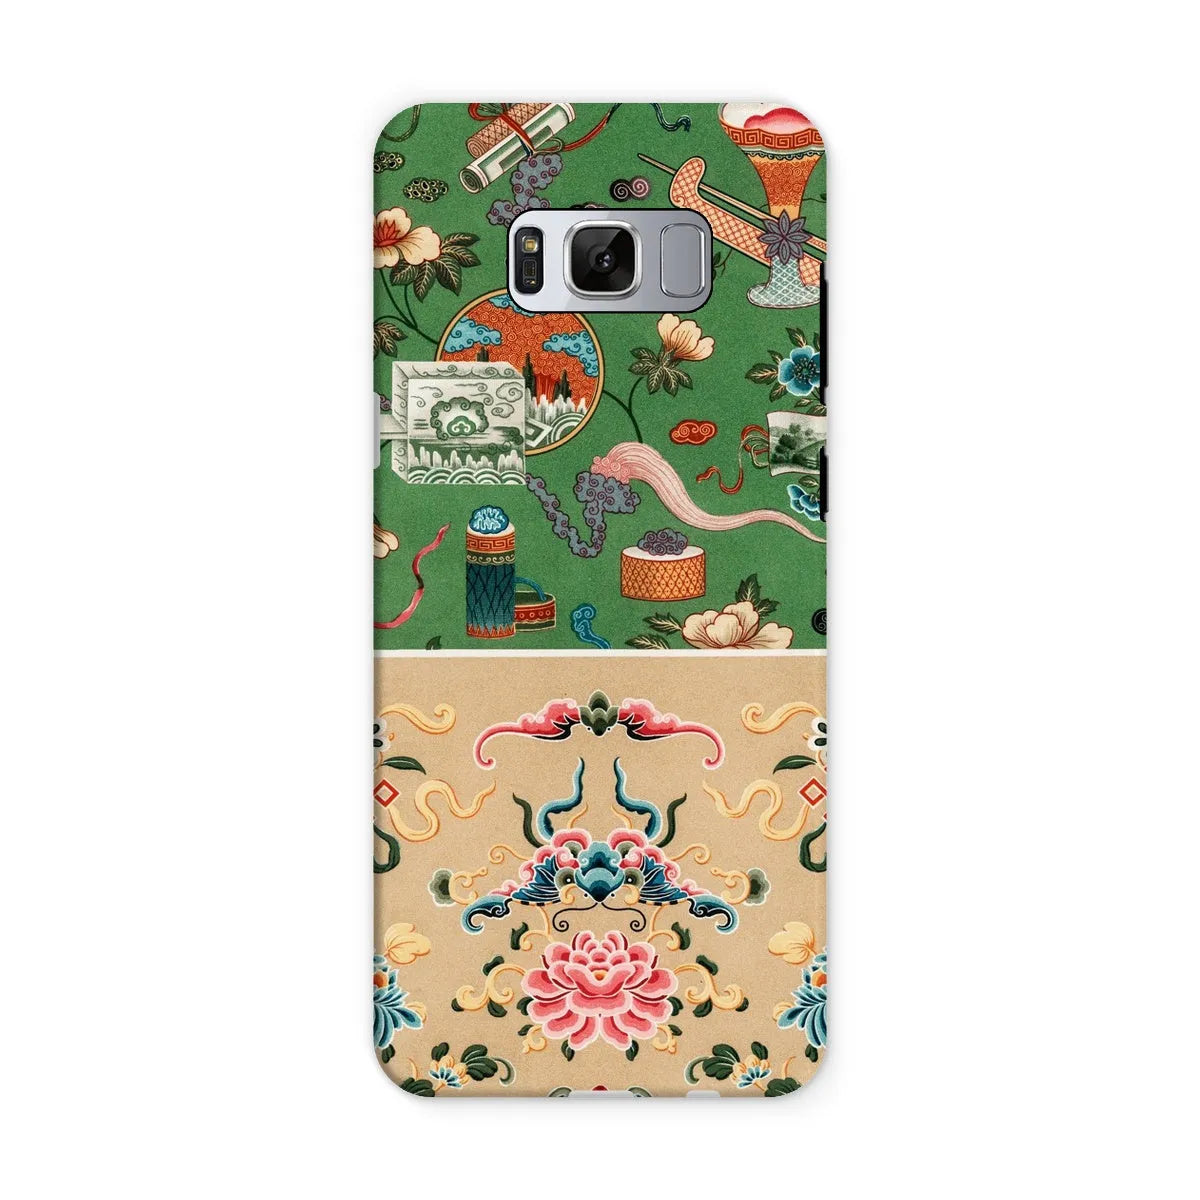 This Chinese Pattern By Auguste Racinet Tough Phone Case - Samsung Galaxy S8 / Matte - Mobile Phone Cases - Aesthetic